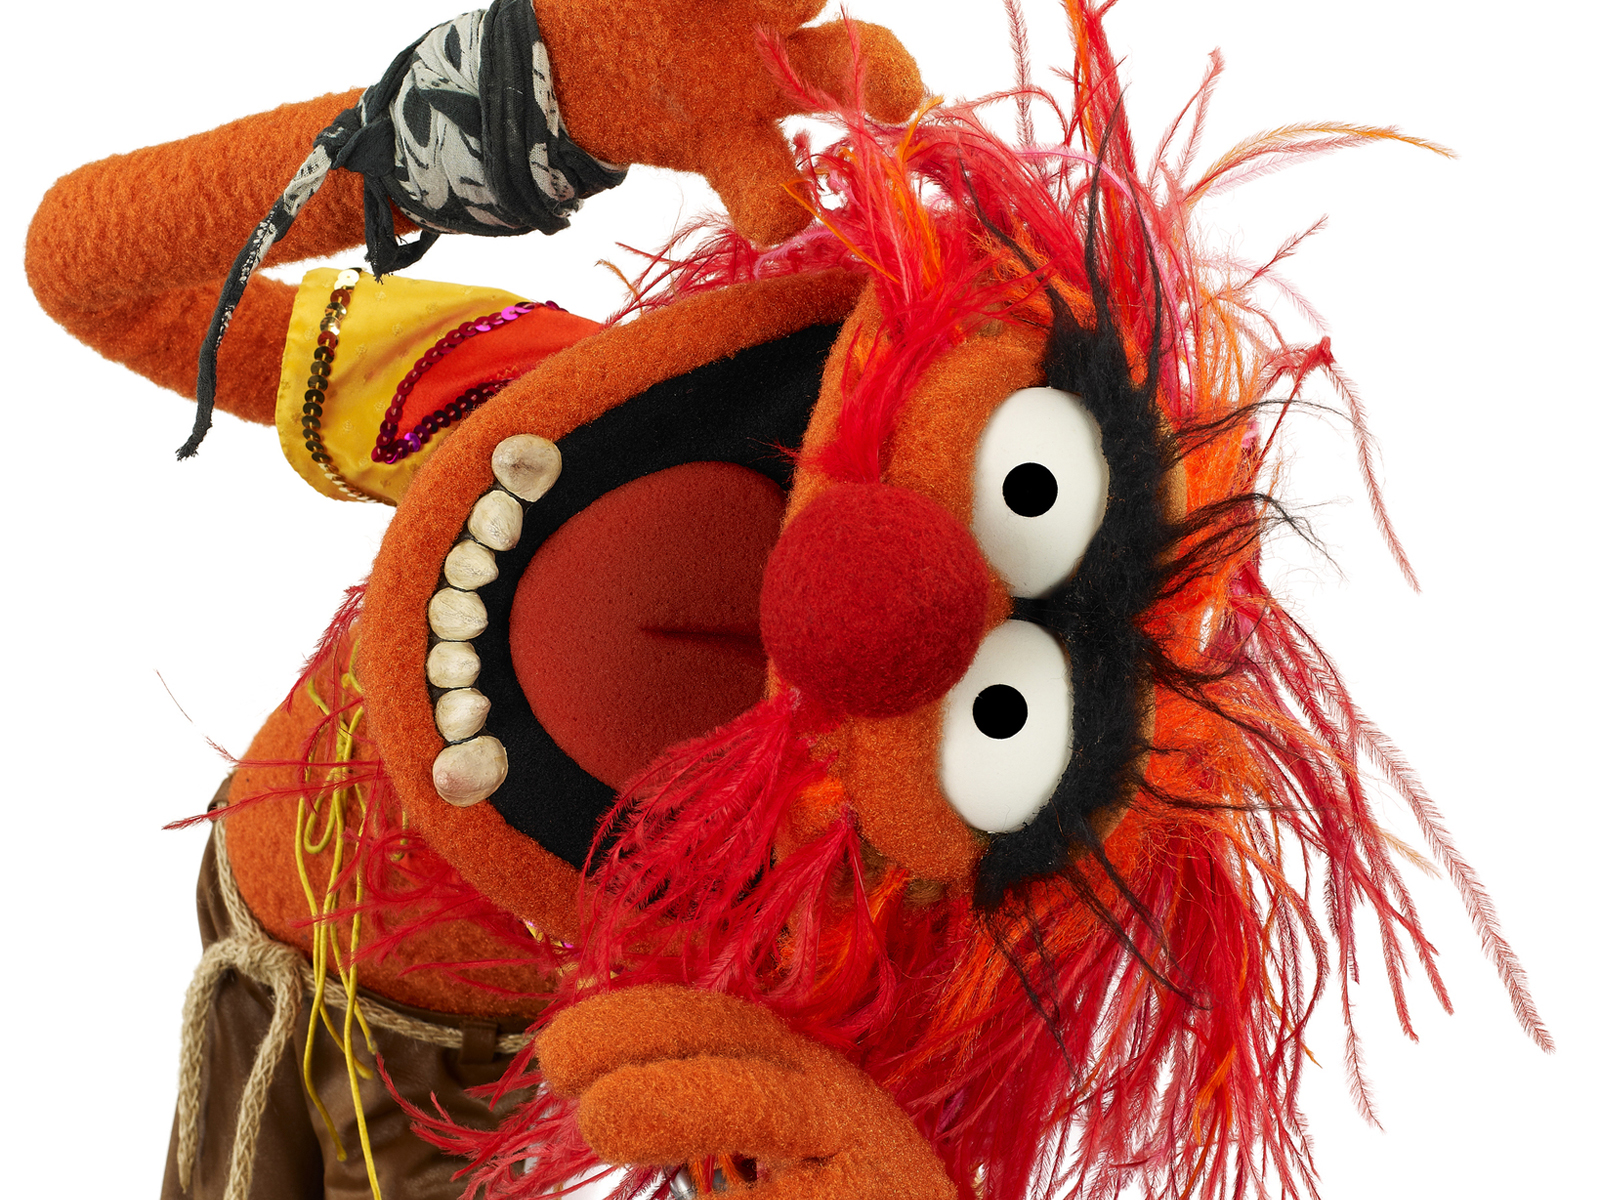 Muppets Animal Wallpaper Imagui For Your